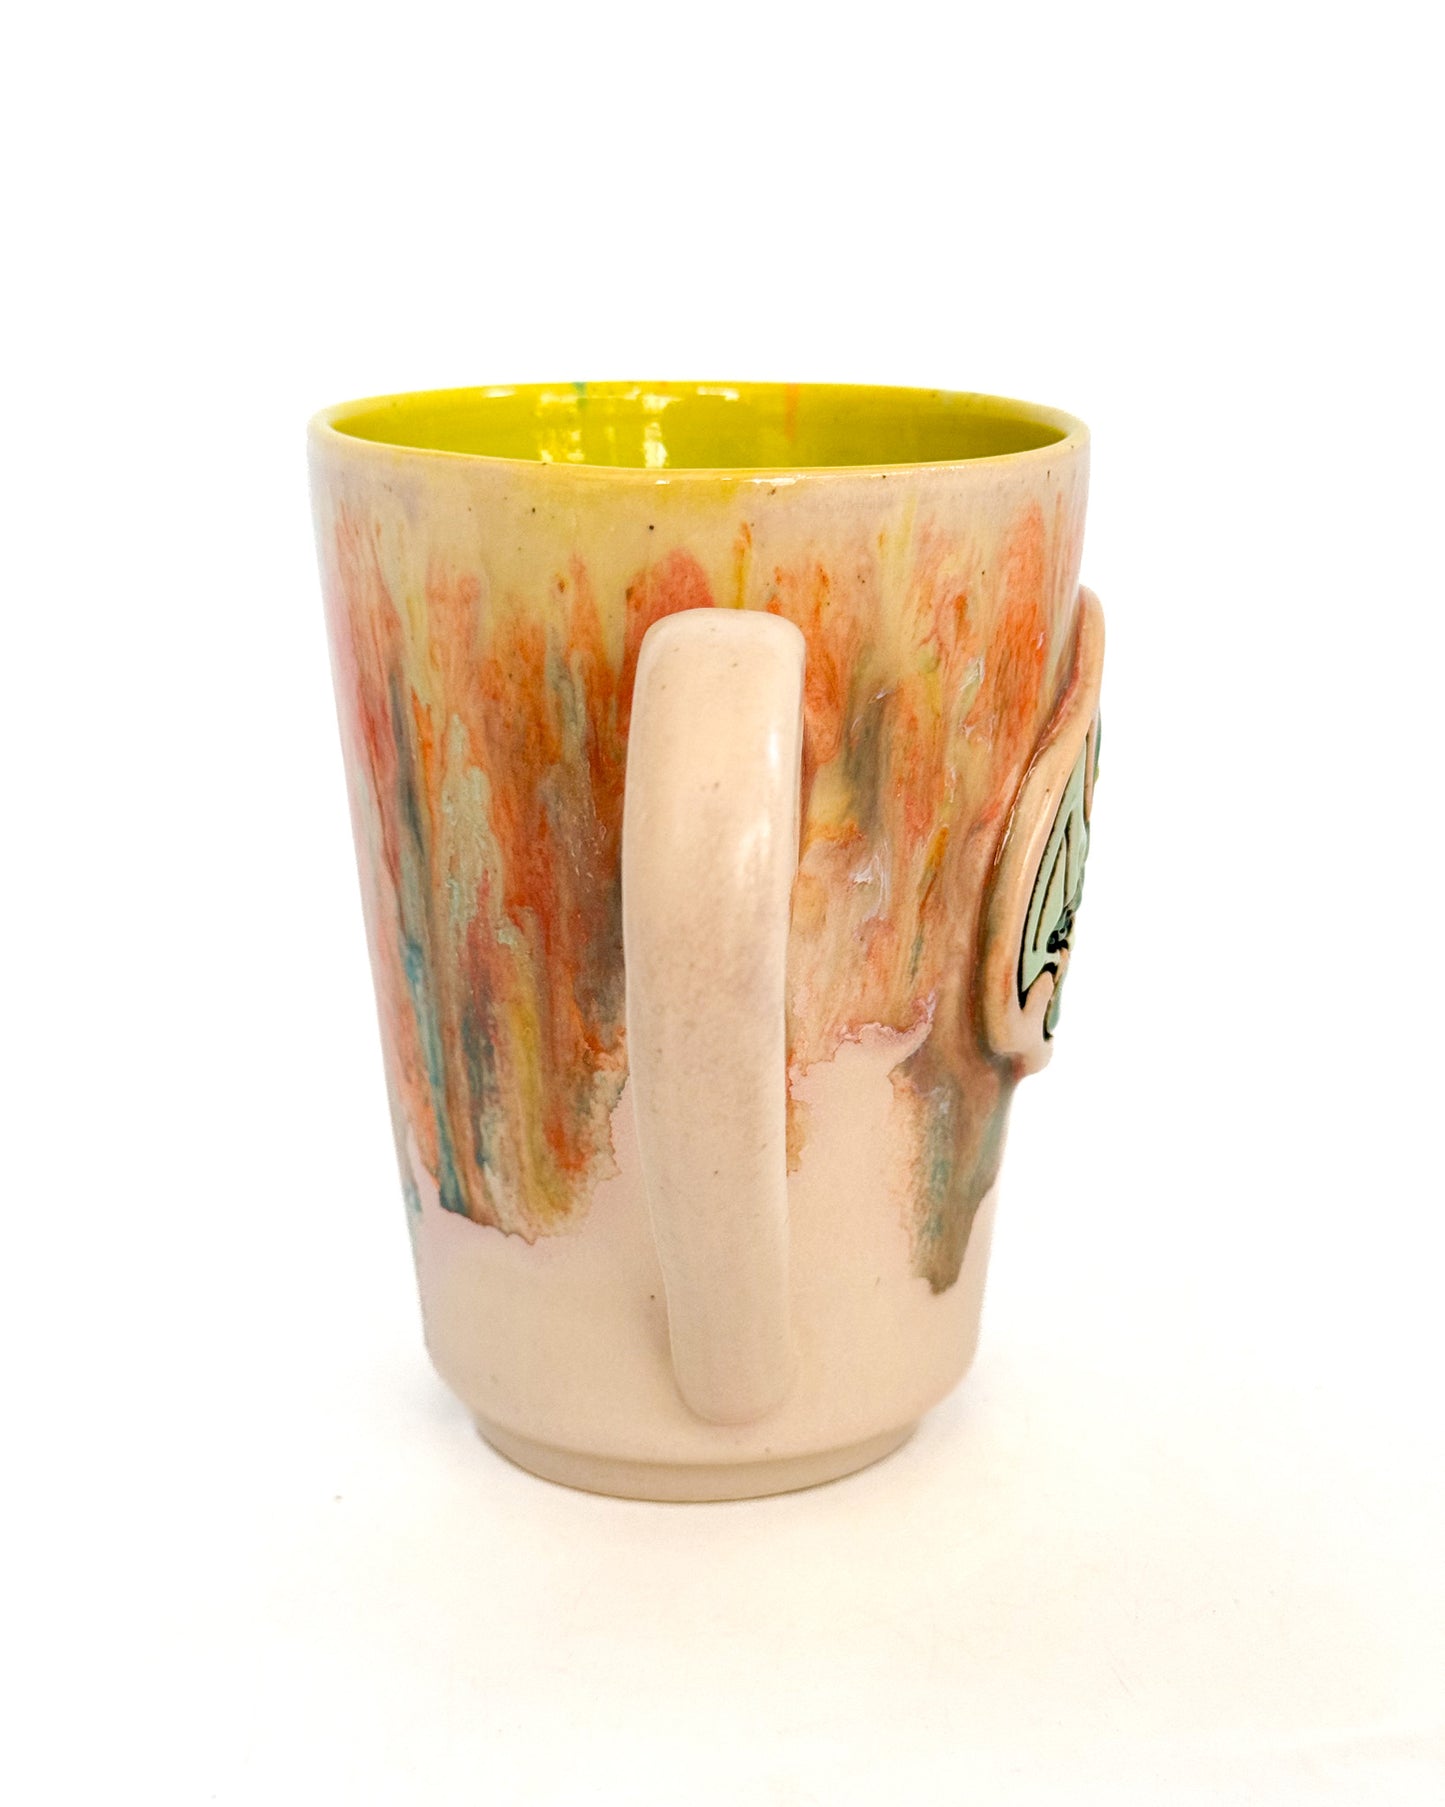 Cryptid Cutie Mug with Sherbert Drips | Cthulhu with Bright Green Interior | SECONDS